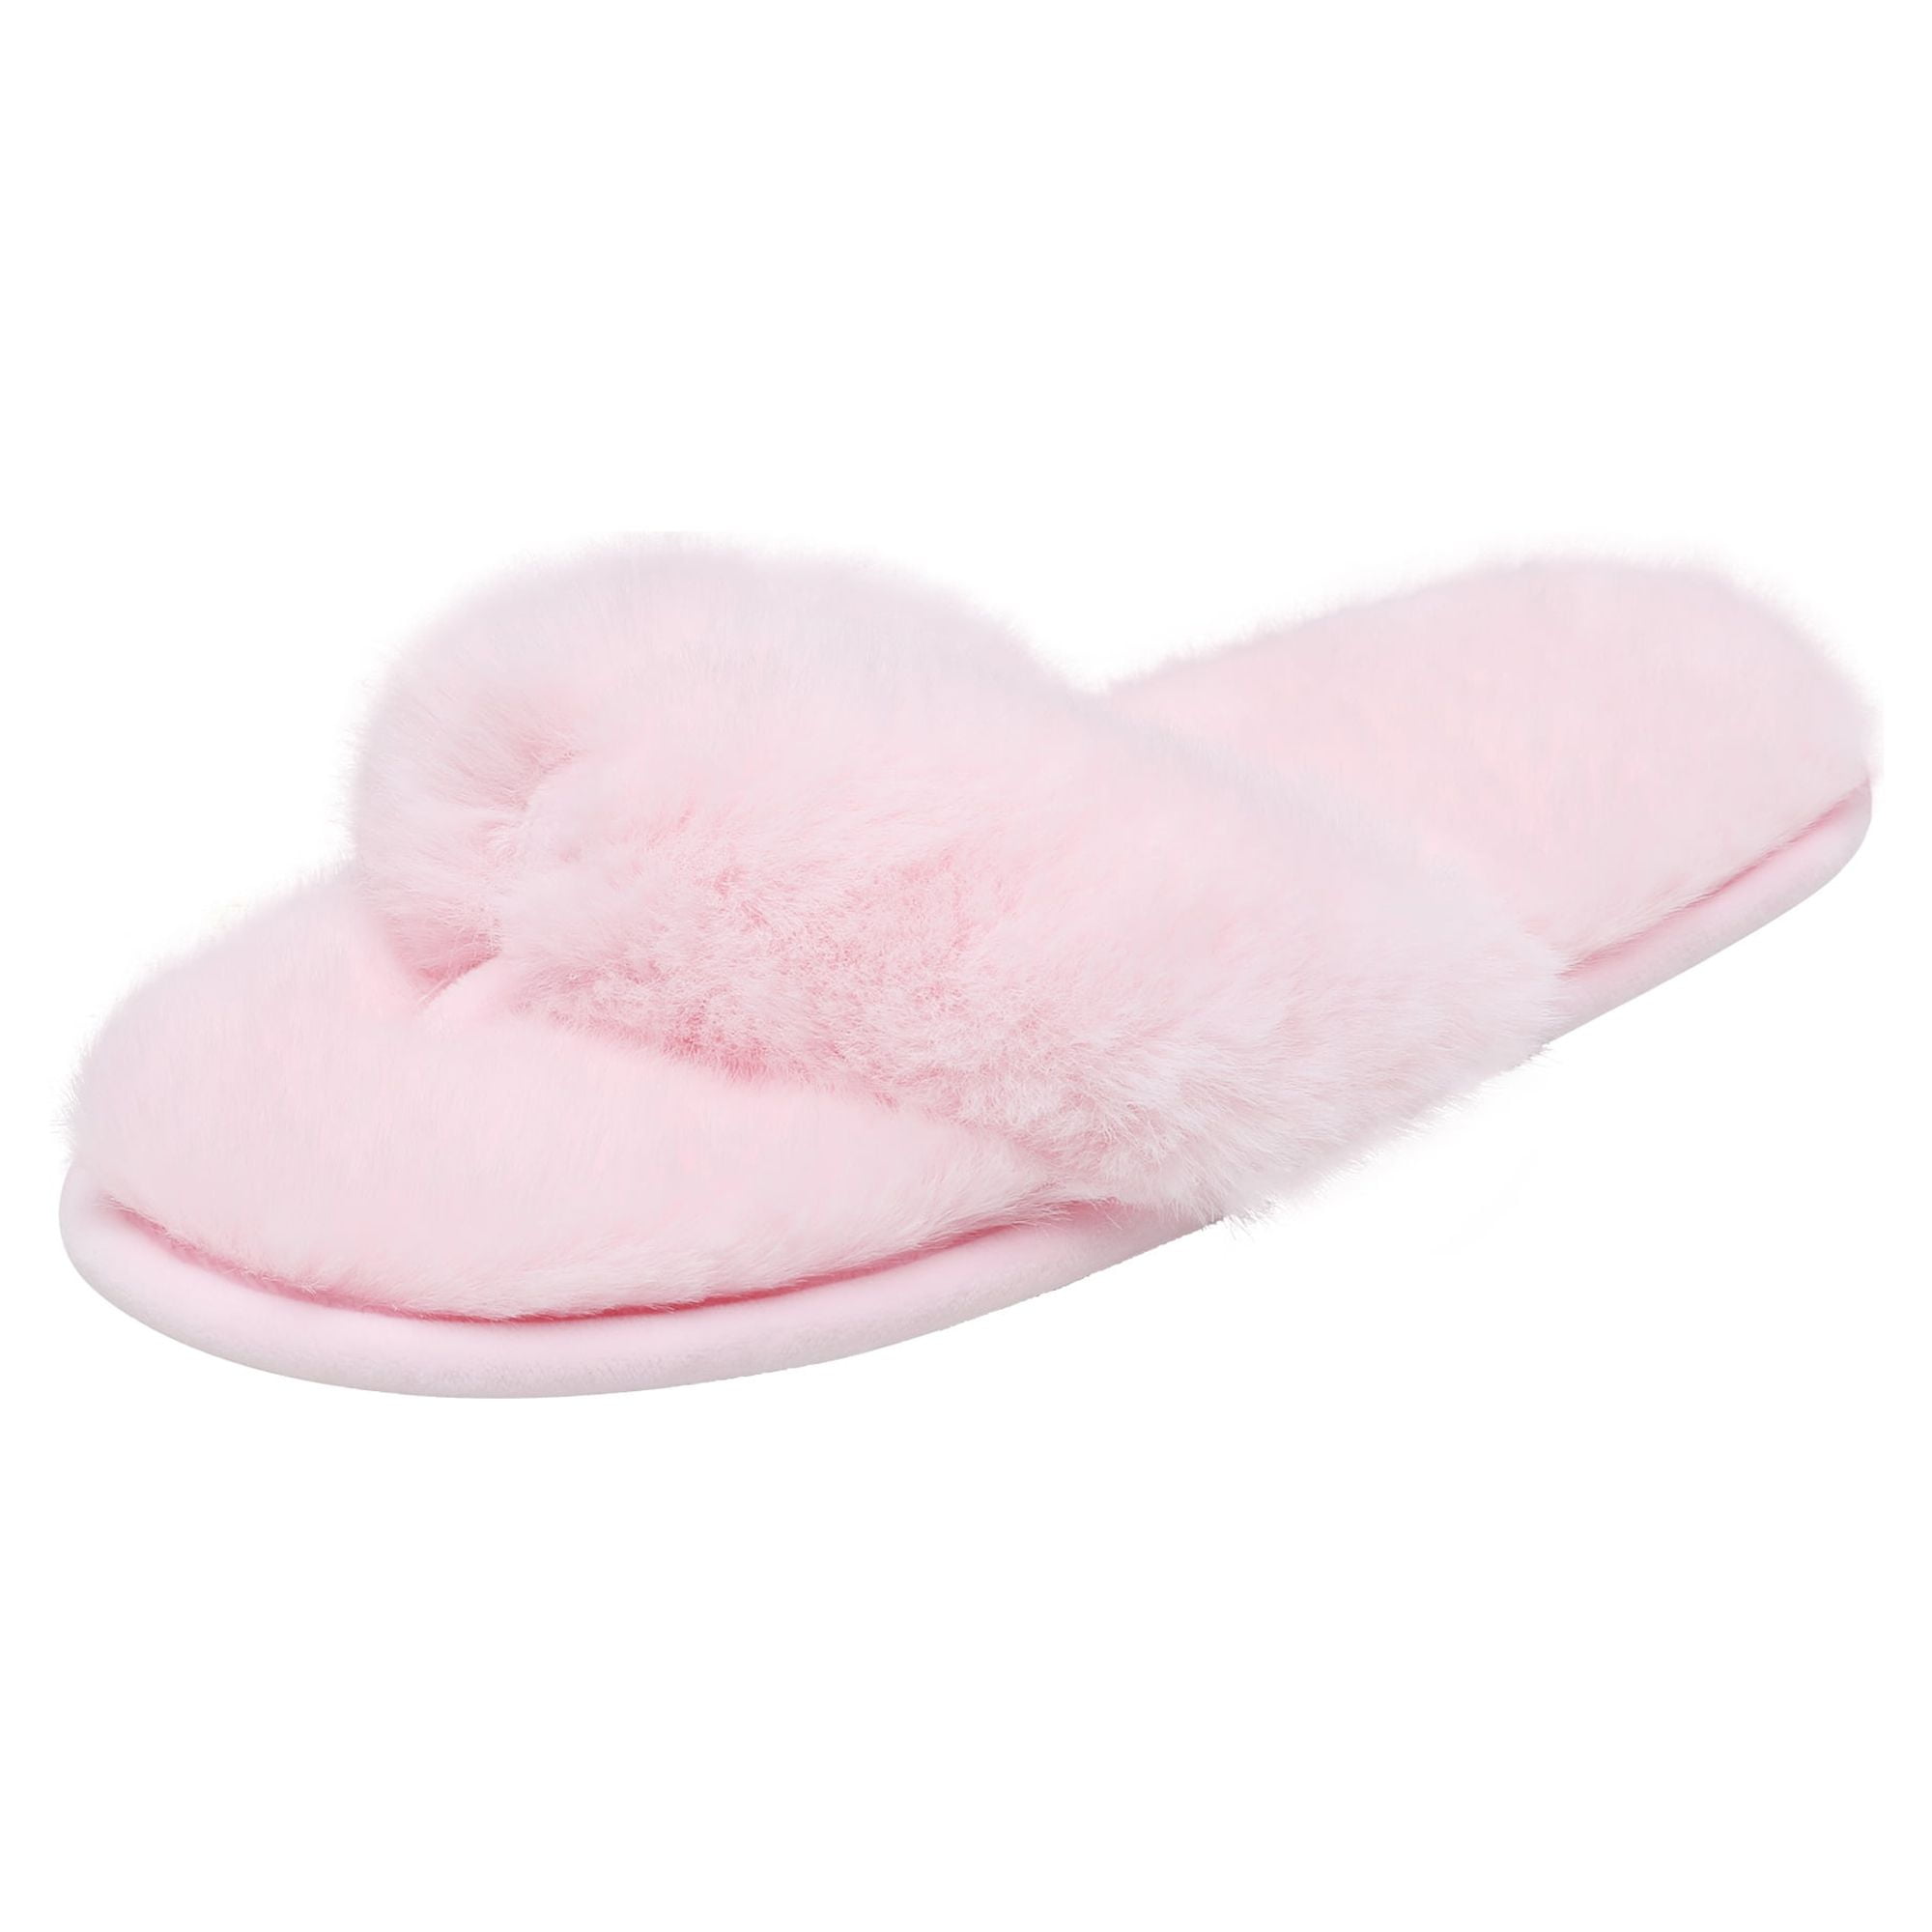 DREAM PAIRS Women Soft Faux Fur Thong SLippers Women's Slip on House  Slippers Fuzzy Warm Houseslippers Shoes SPA-03 PURPLE Size 10 